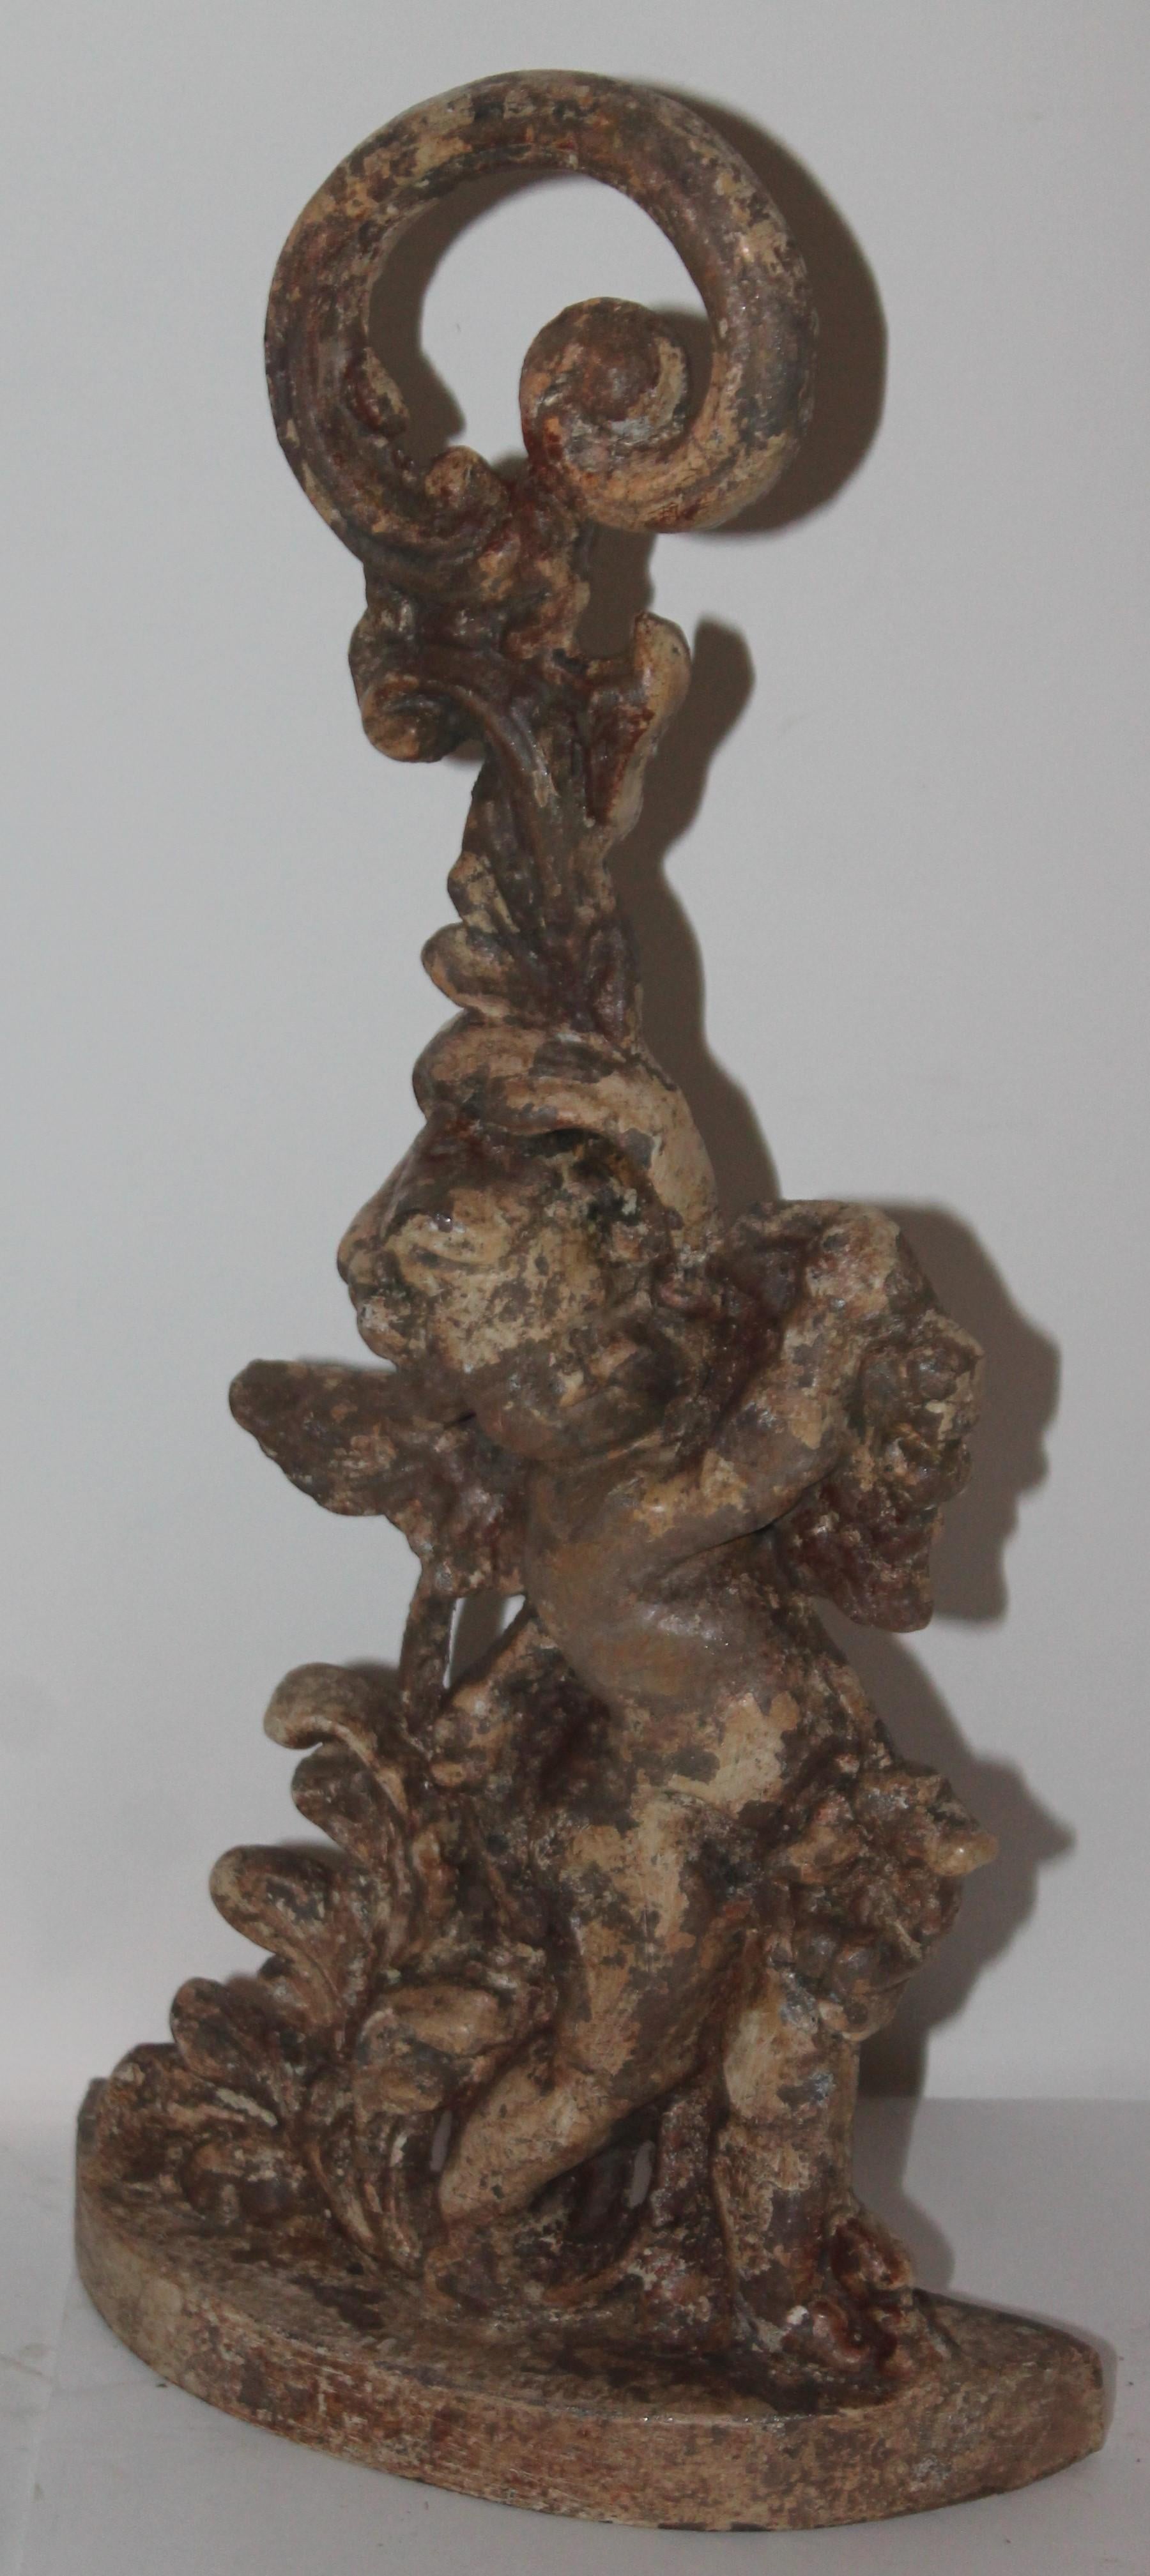 This grungy painted angel heavy cast iron door stop is in good condition. Great aged surface.